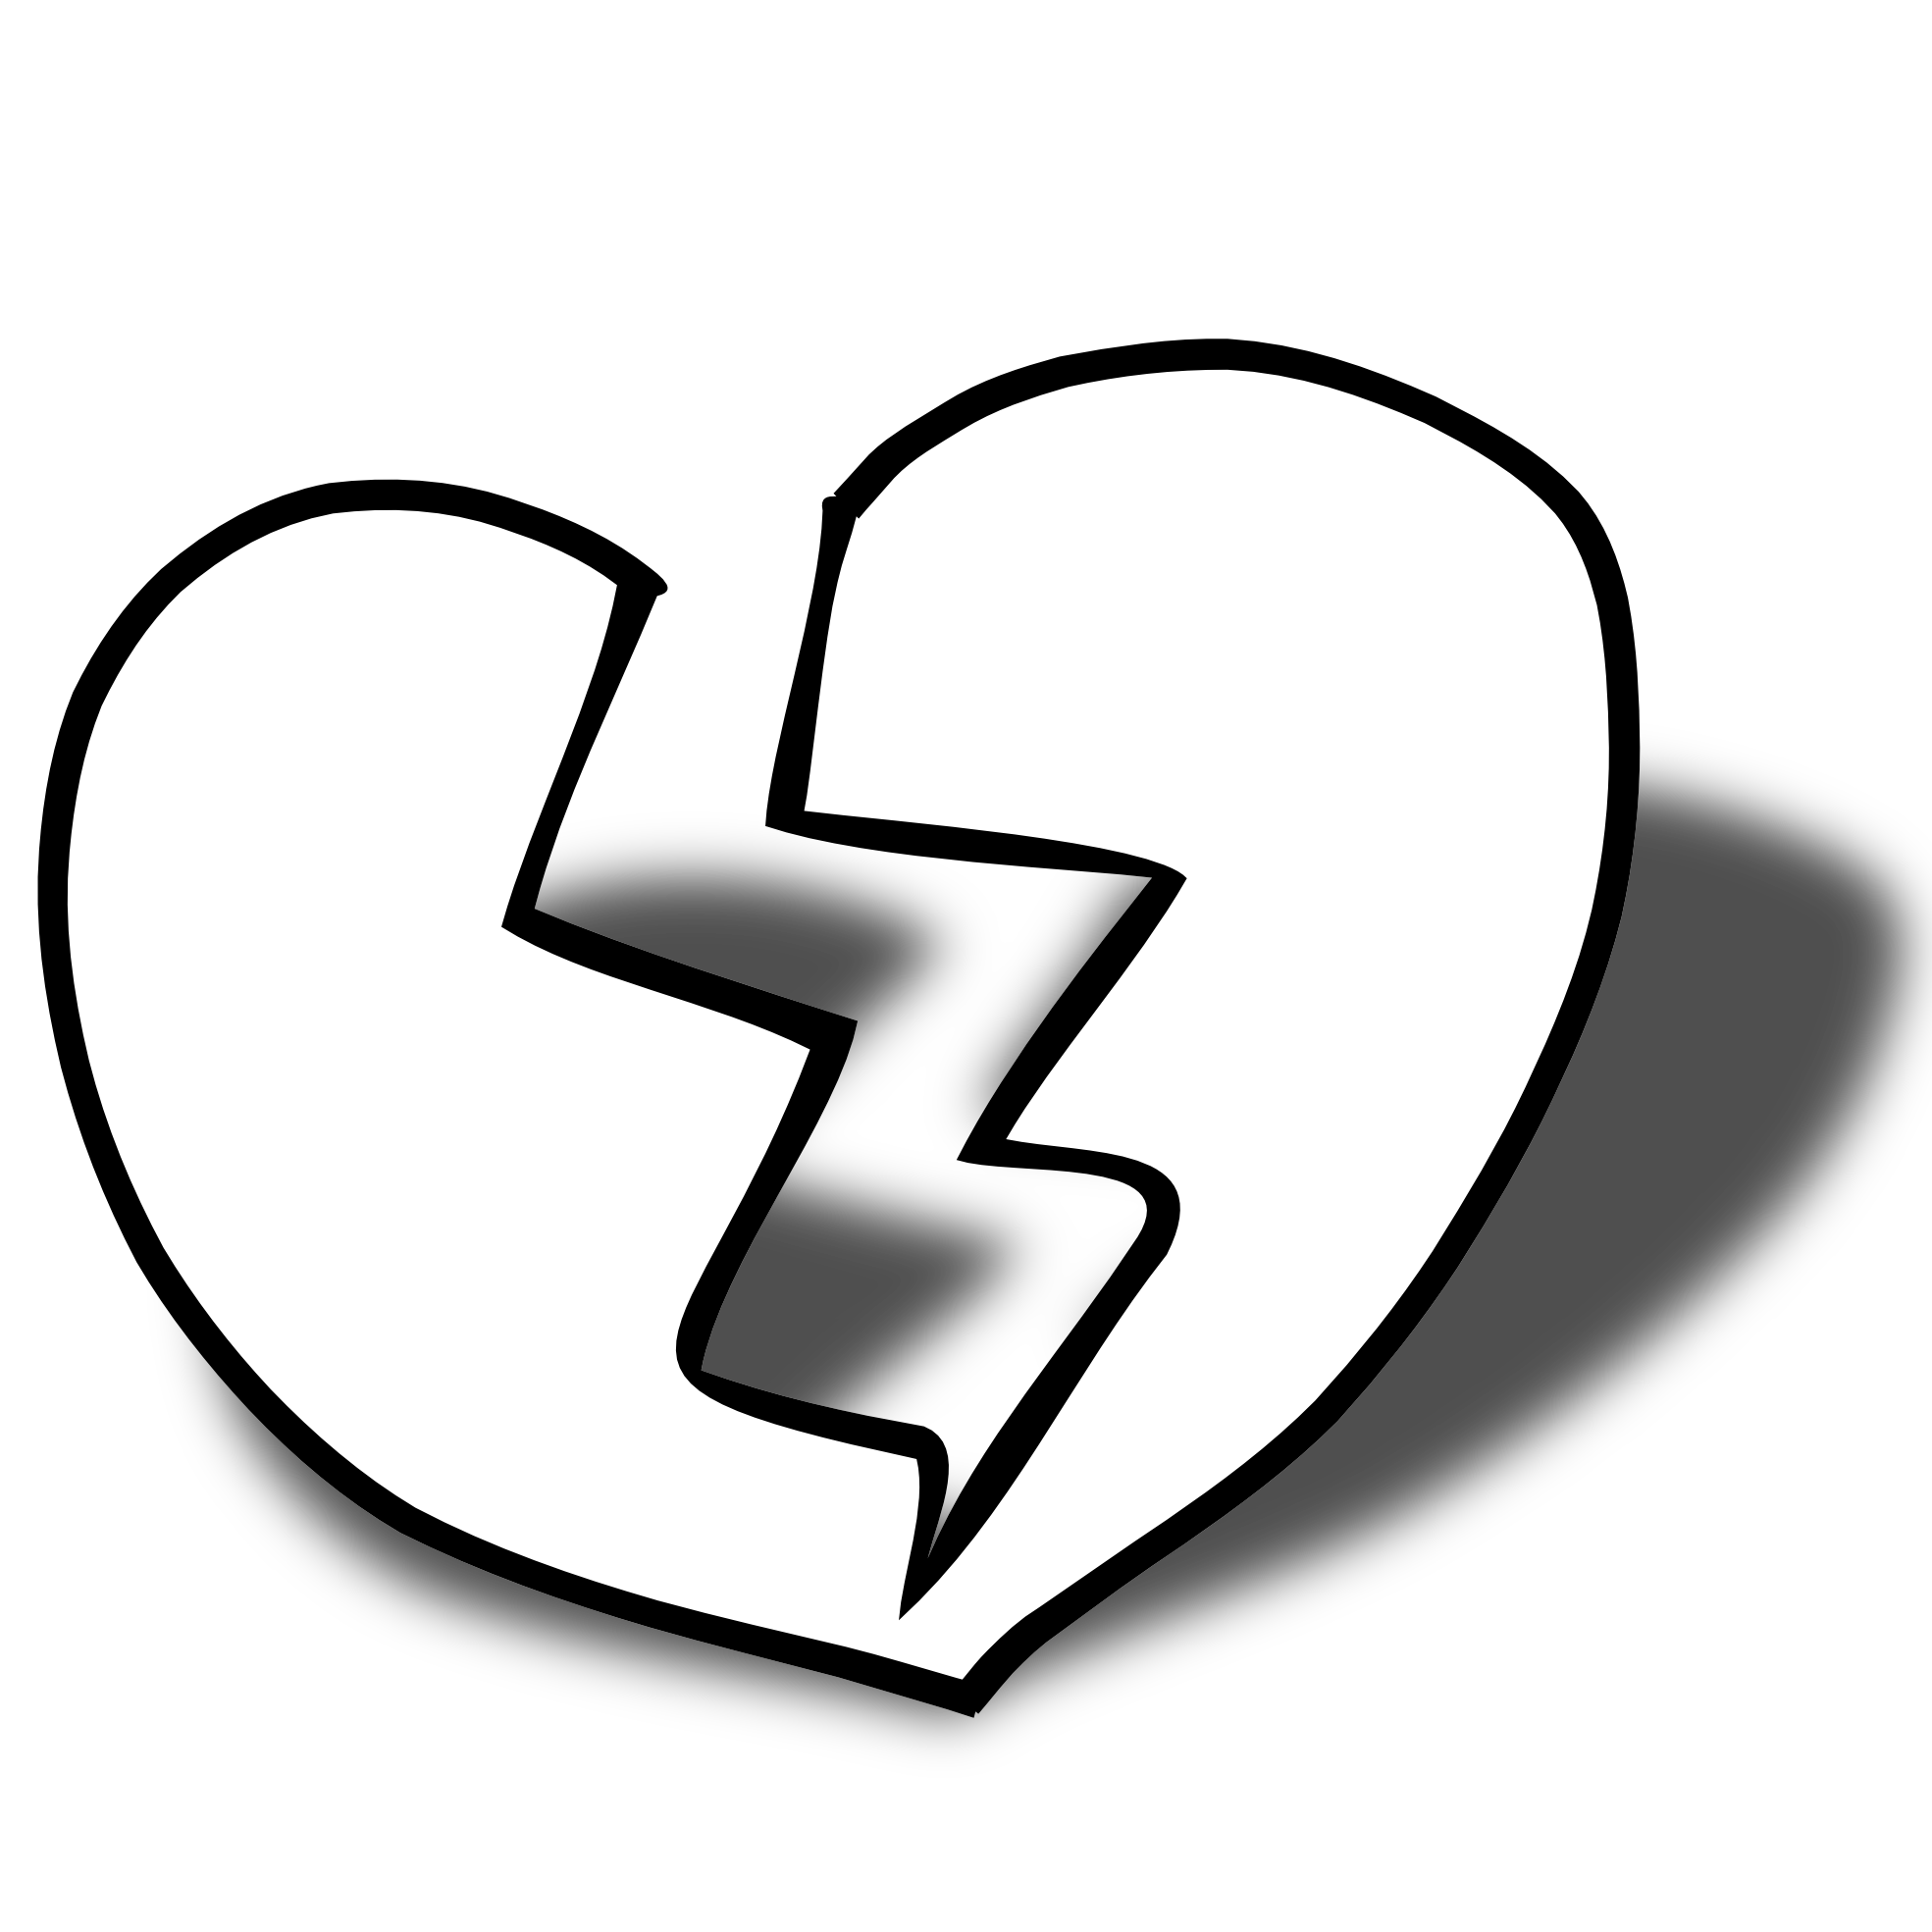 Clipart Of Heart Black And White - ClipArt Best